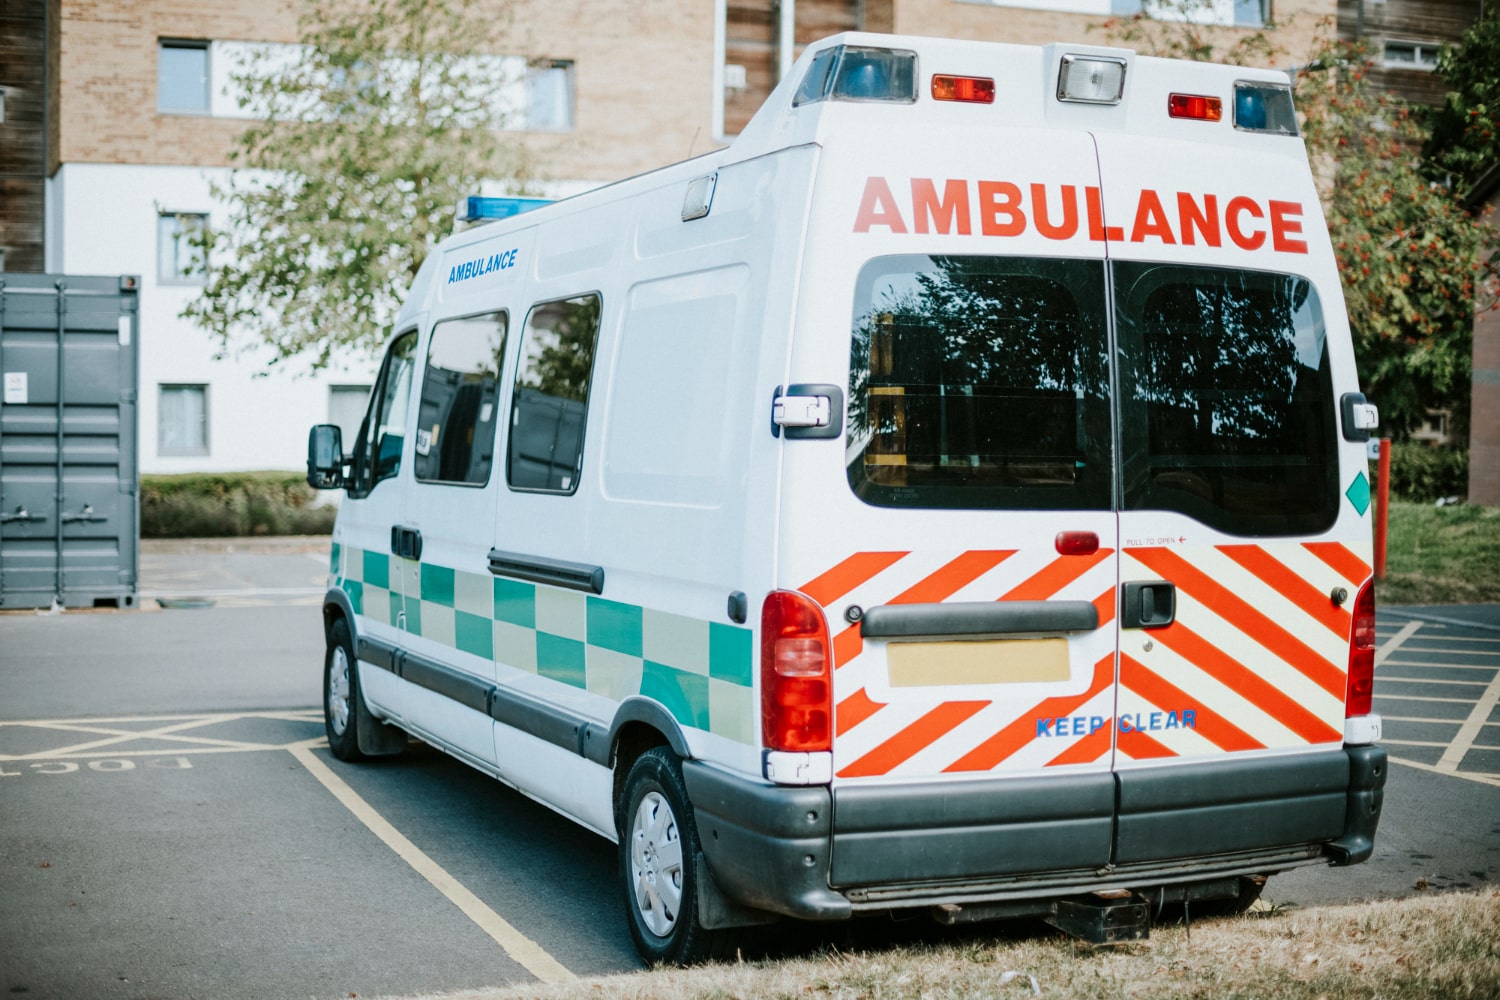 ambulance on standby at events